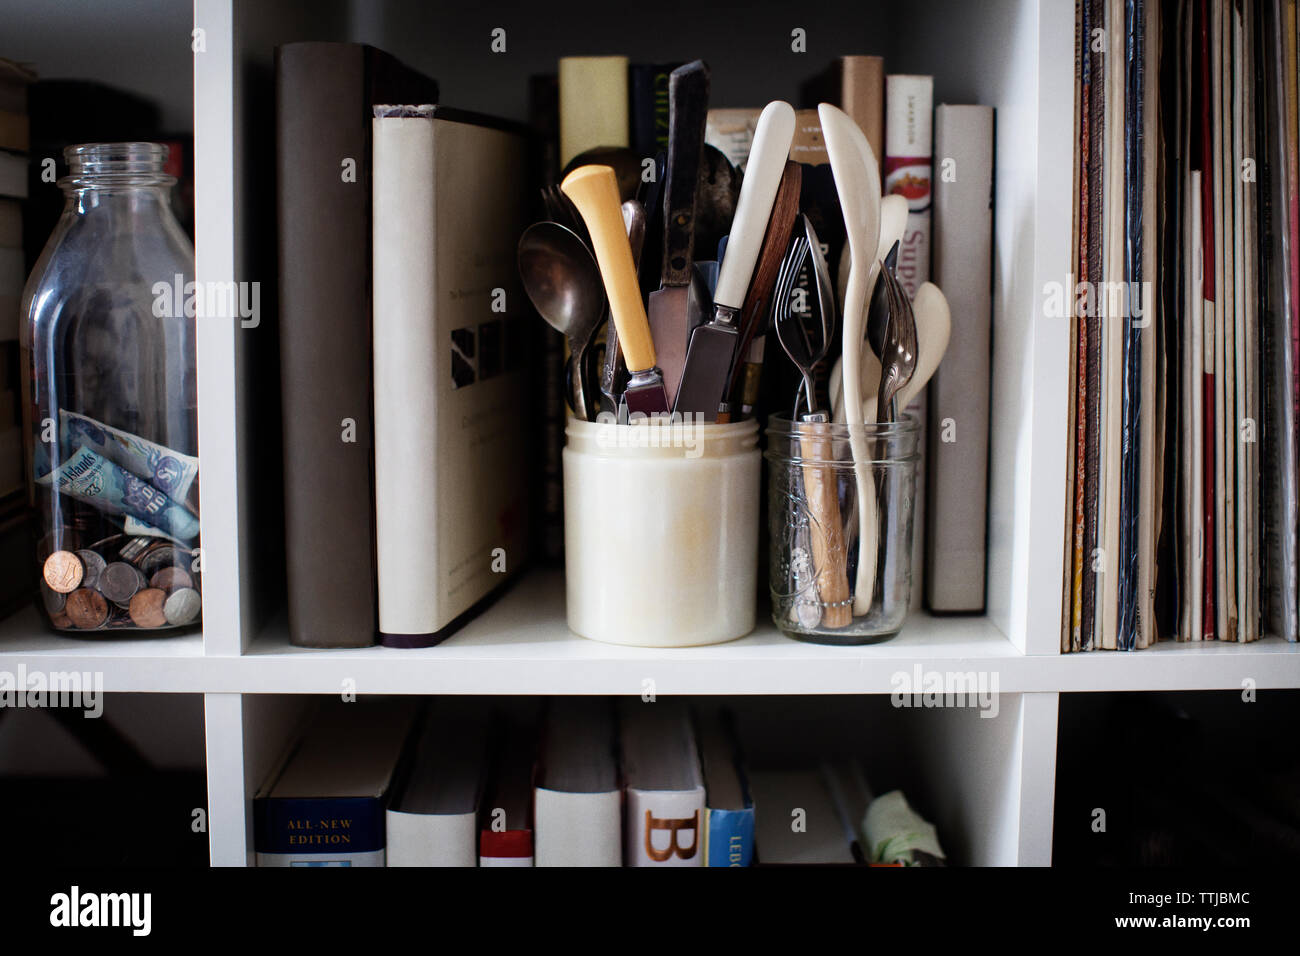 Cutleries in containers on bookshelves Stock Photo